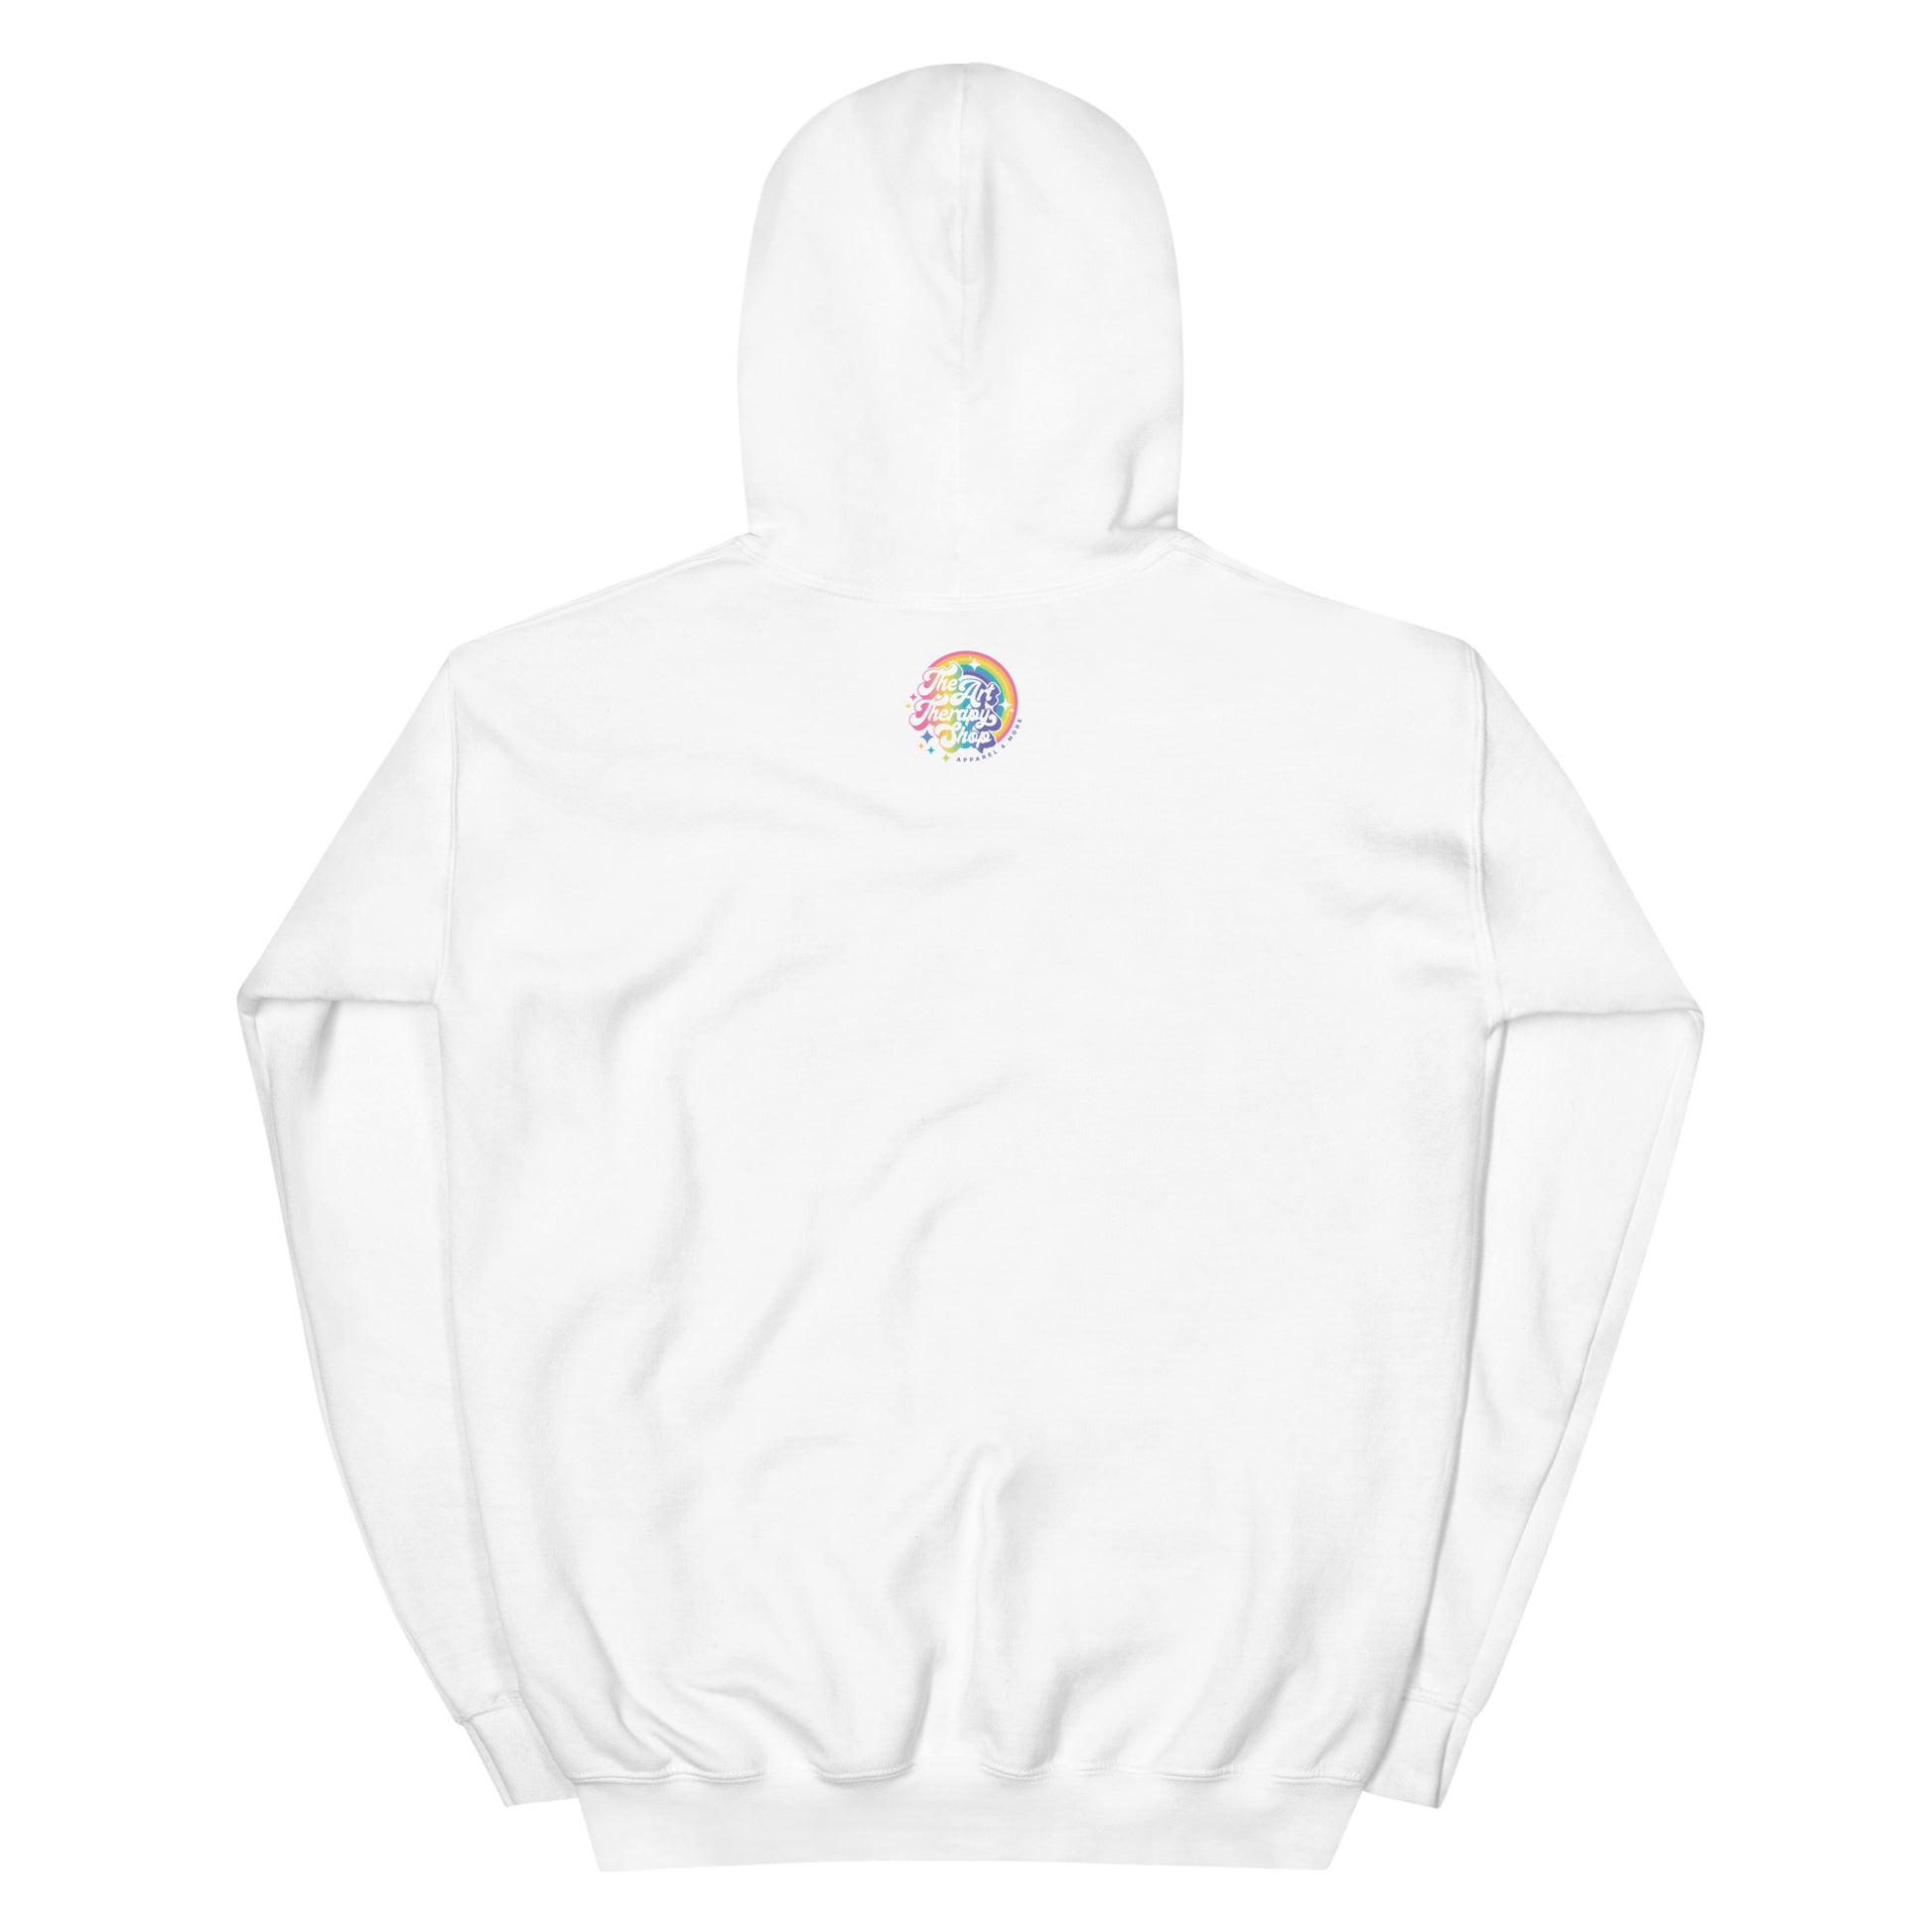 Will Work For Art Supplies Hoodie